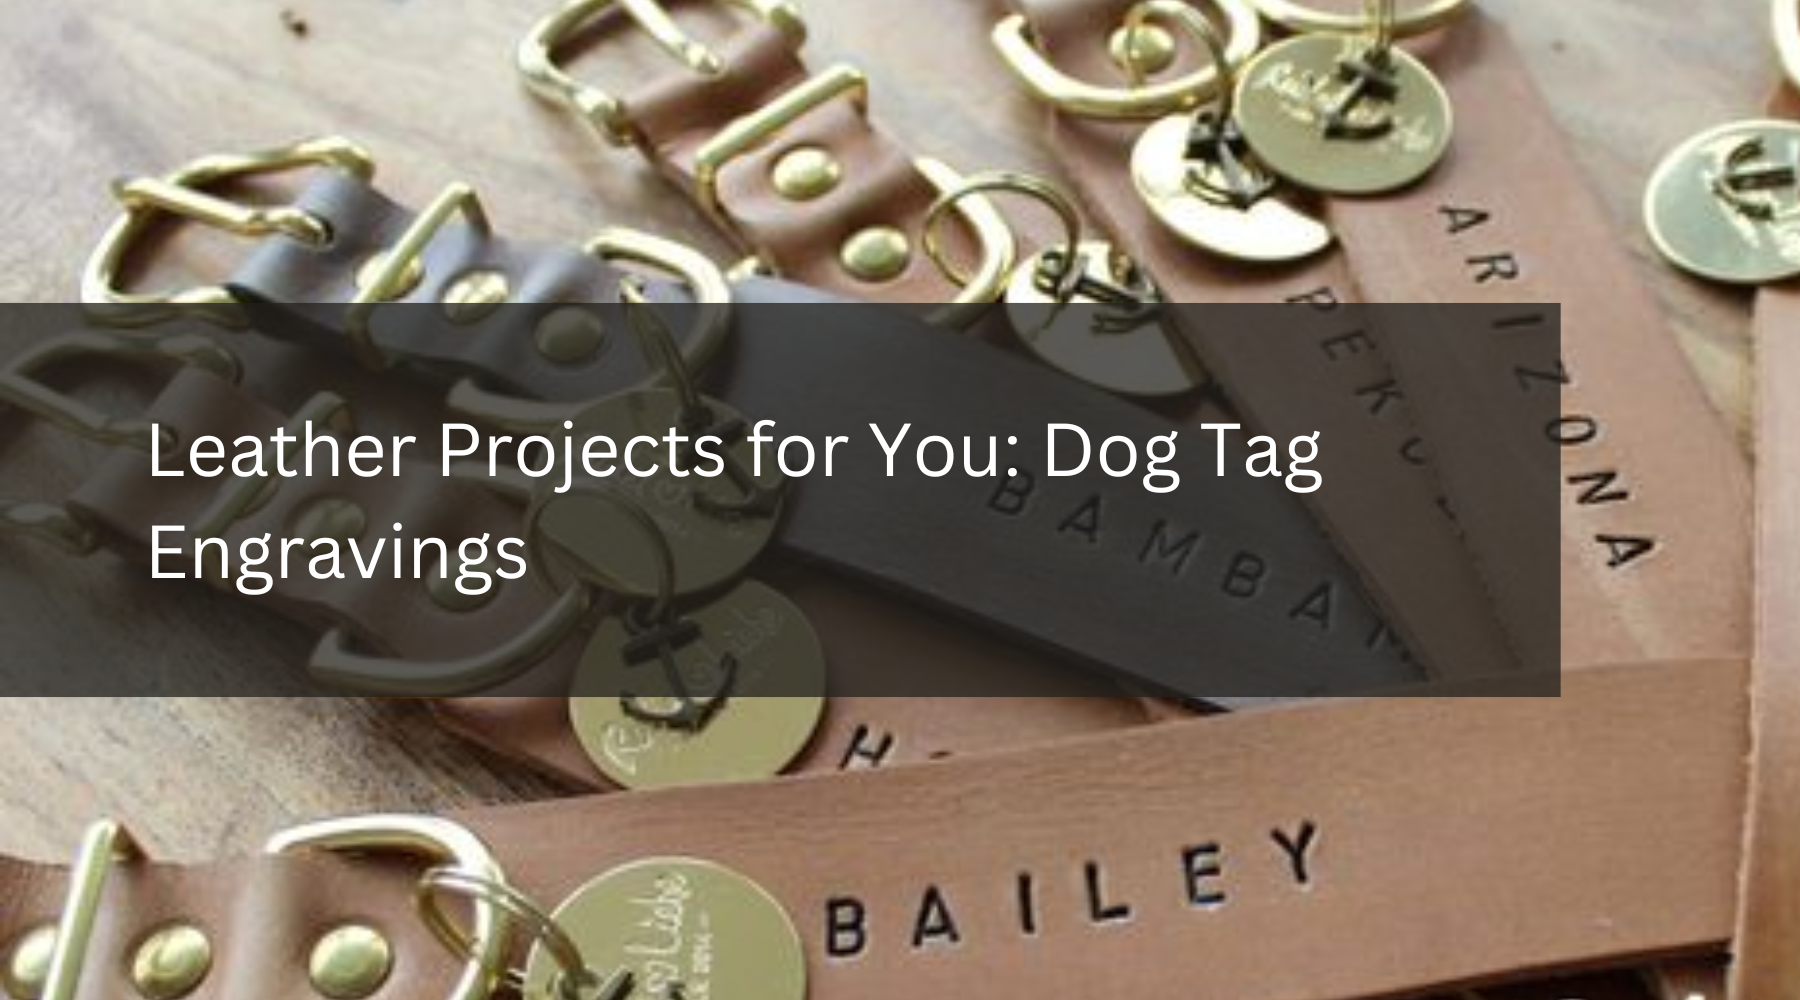 Leather Projects for You: Dog Tag Engravings